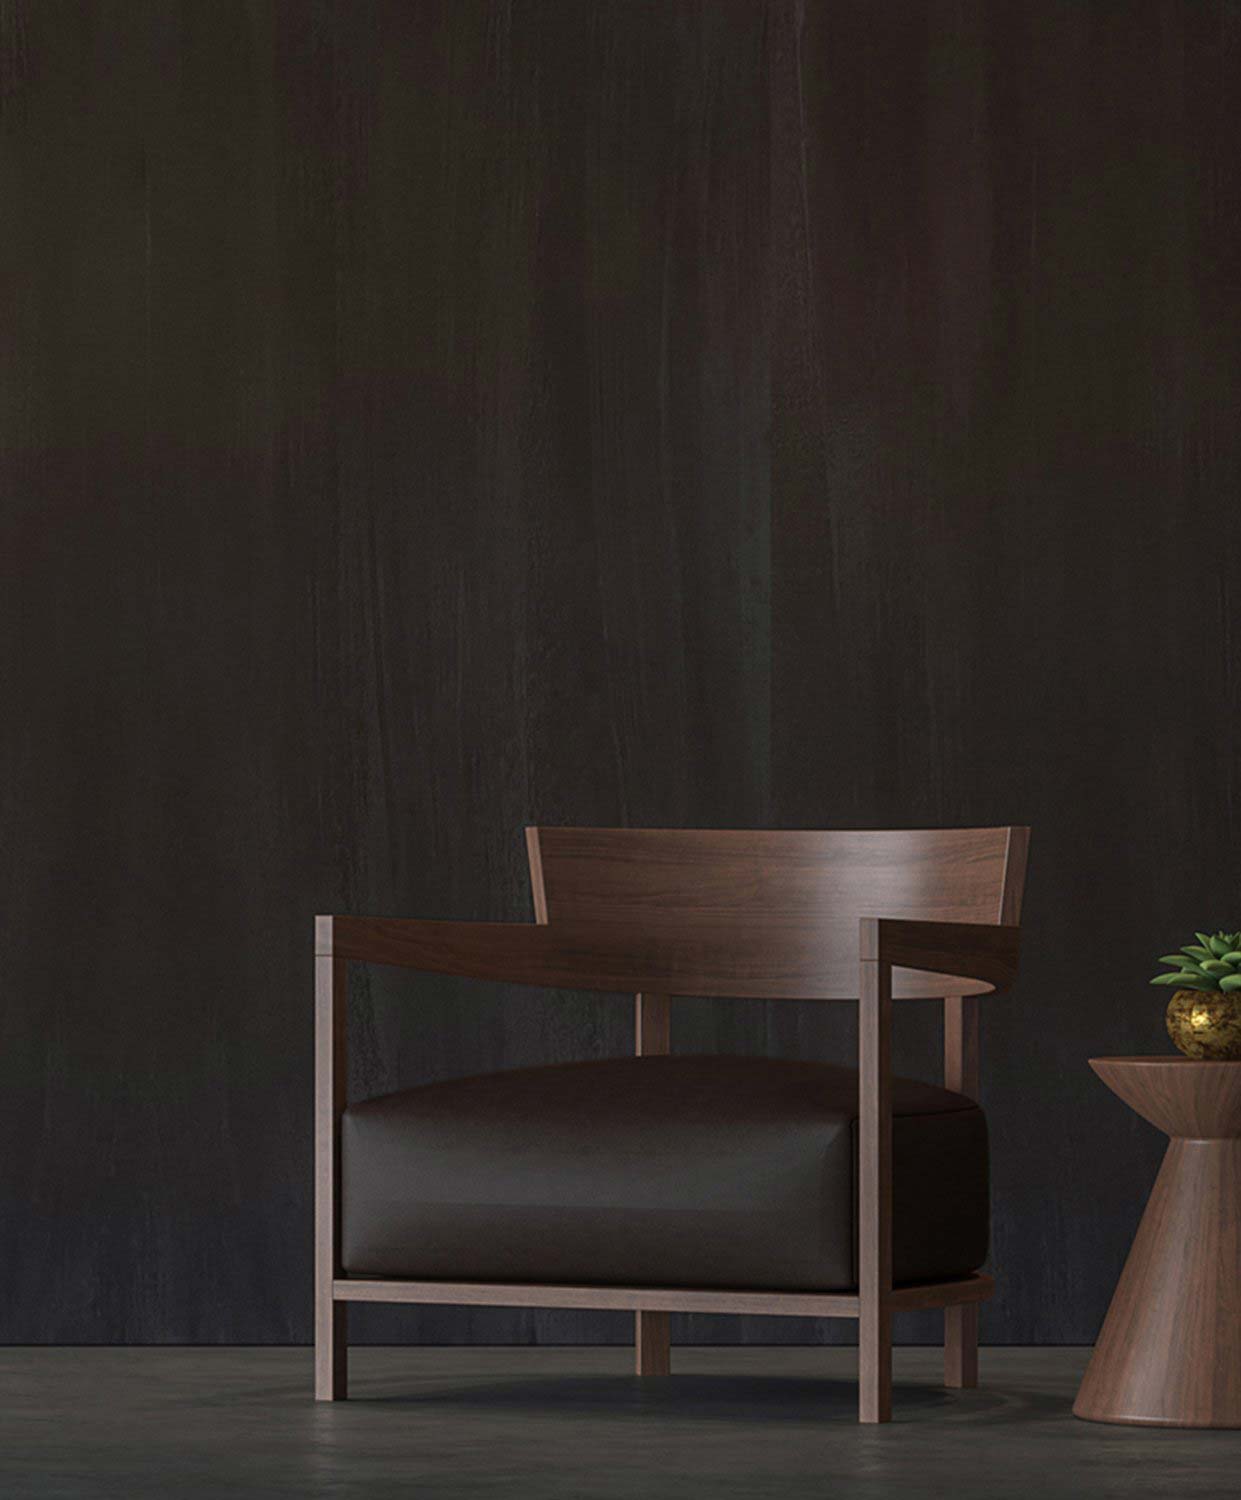 Wooden chair in front of a dark textured paint wall